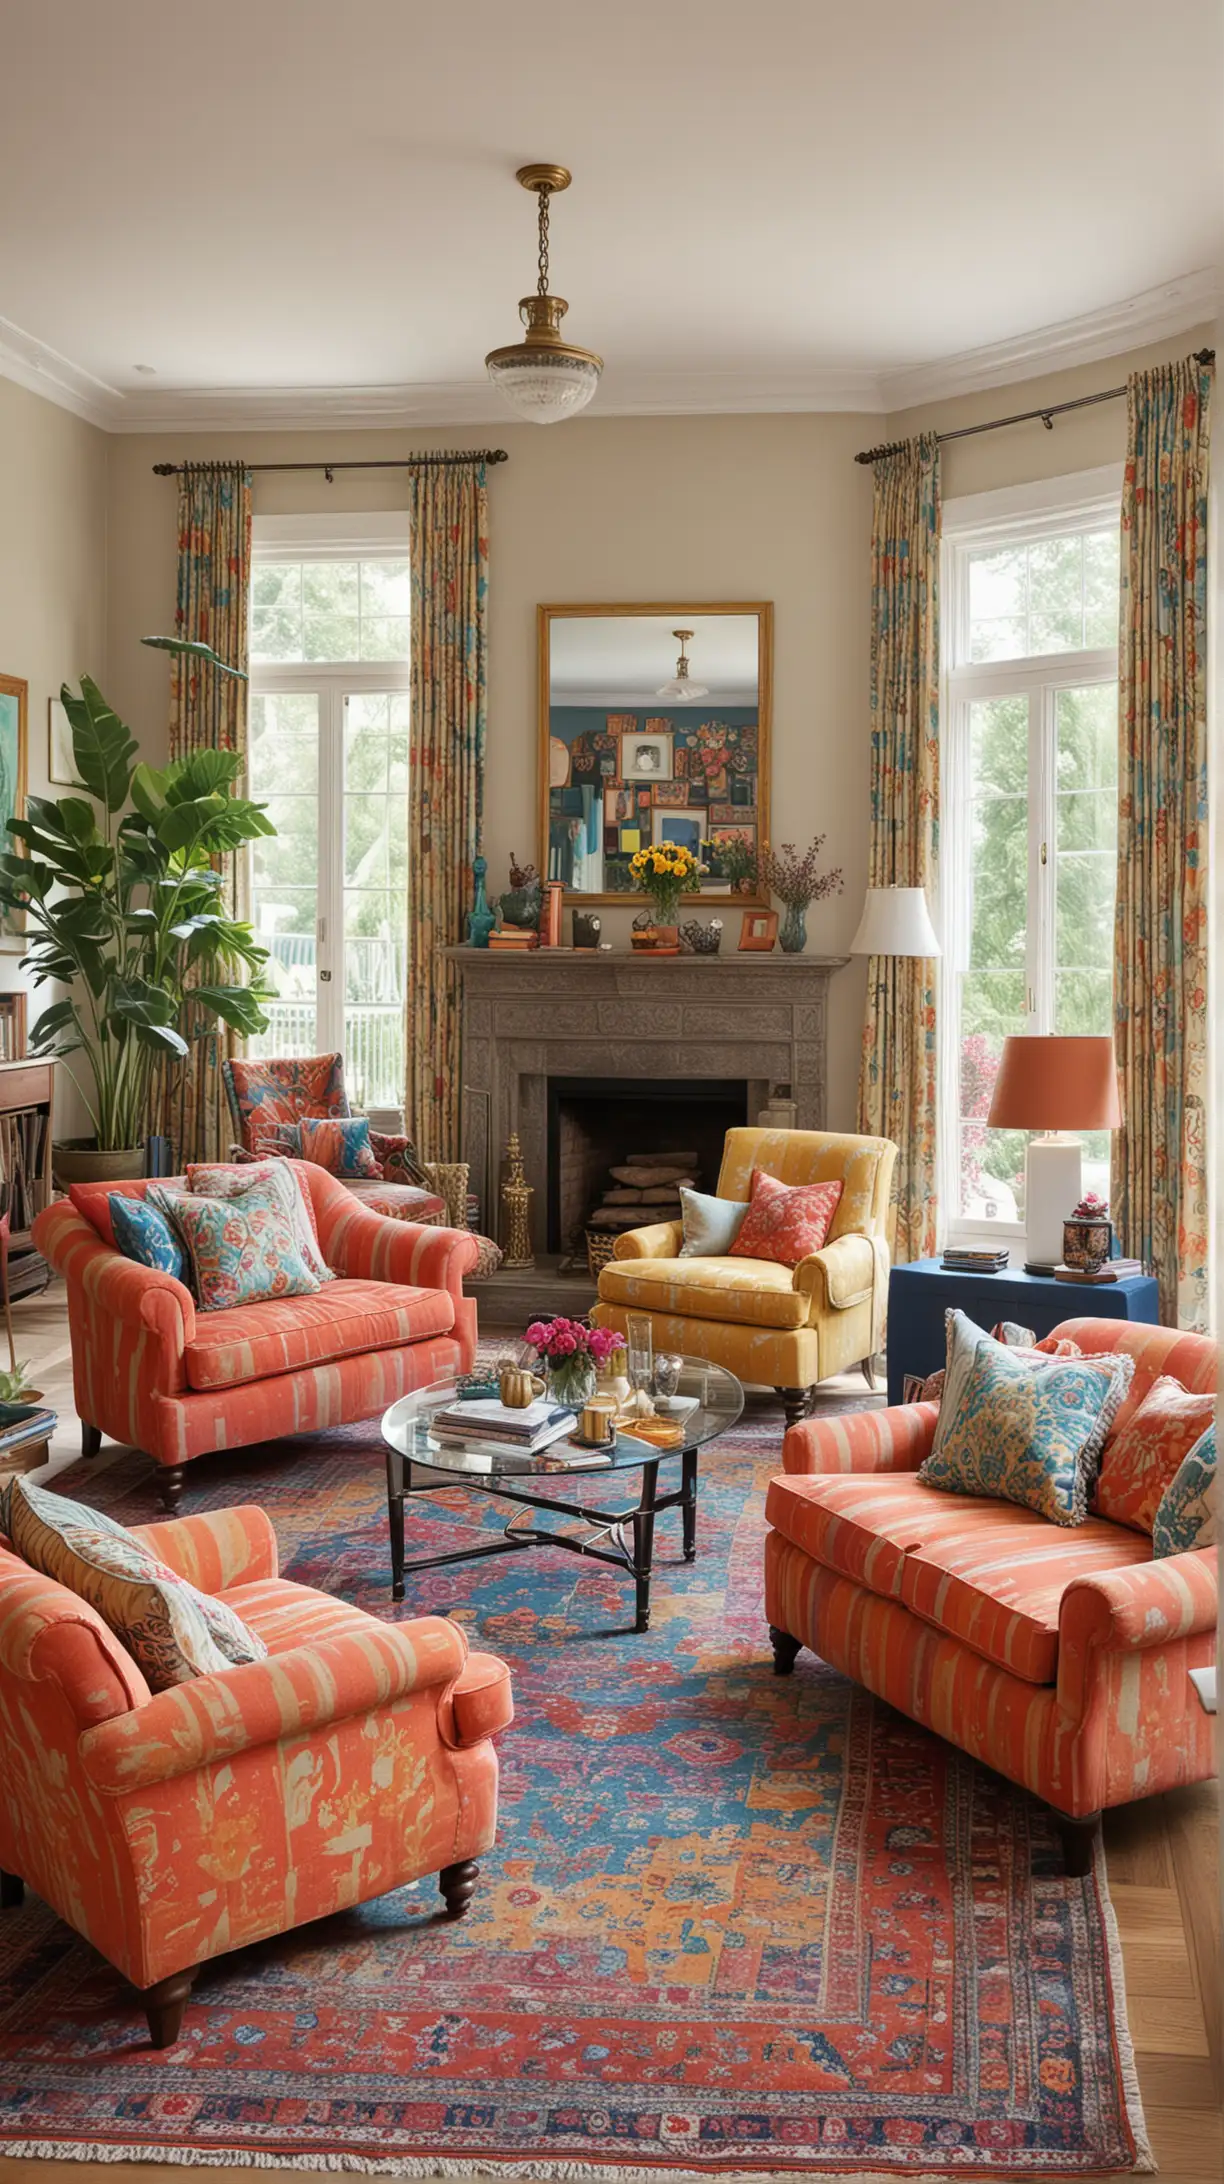 A vibrant living room featuring sofas and chairs adorned with decorative throws in various patterns and colors, adding an eclectic touch.